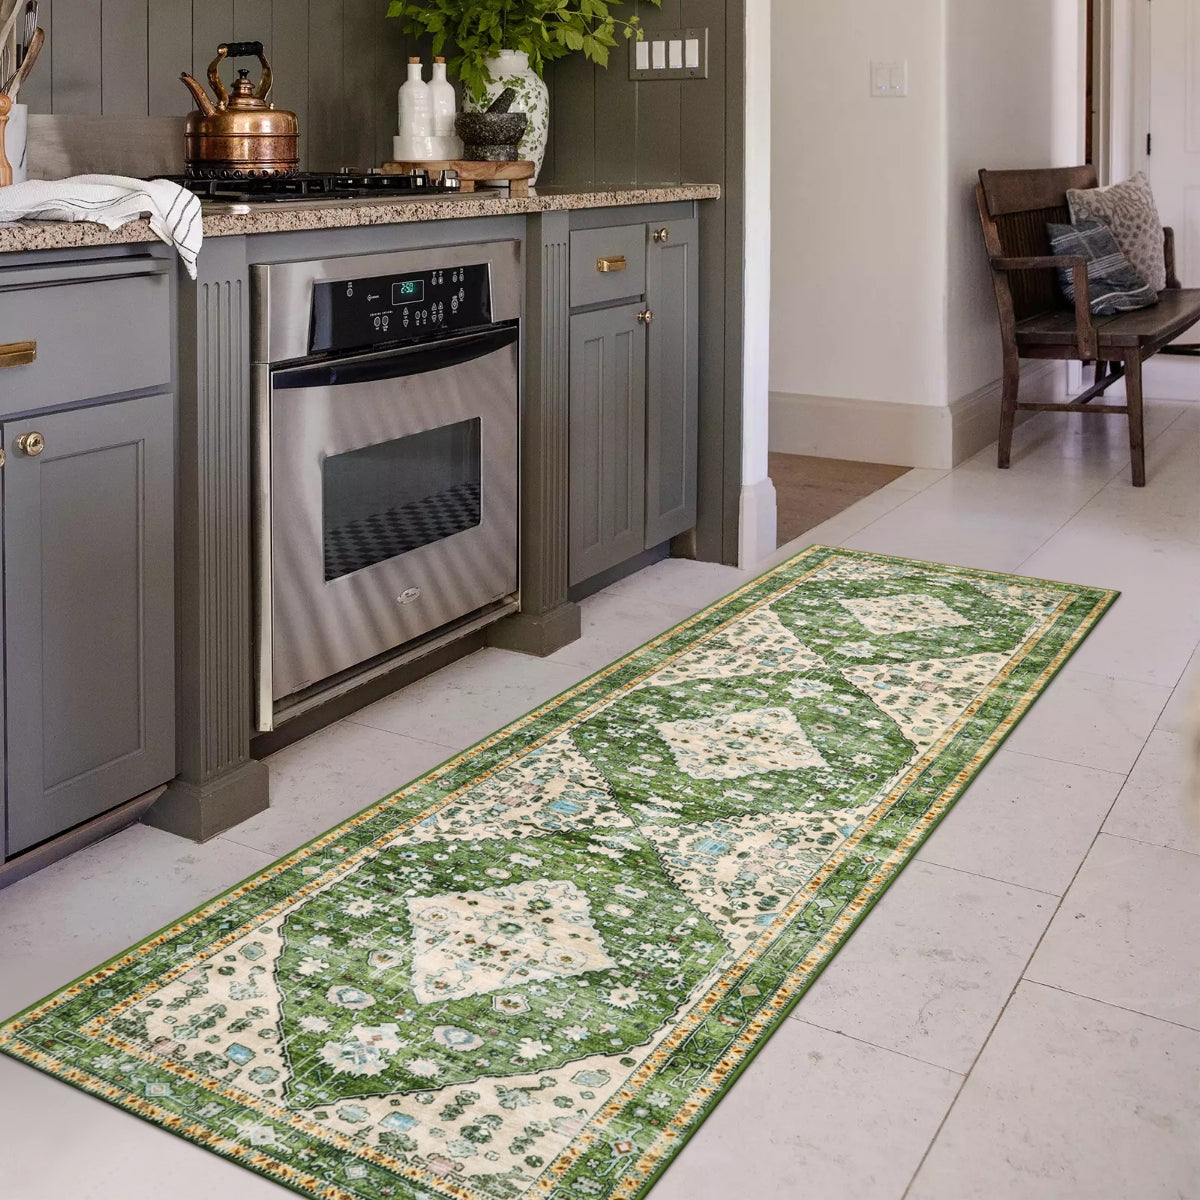 Morebes Boho Tribal Kitchen Runner Rug Washable,2x4 Rug Non-Slip,Green  Bohemian Hallway Rug,Small Front Door Rug,Distressed Soft Throw Low-Pile  Carpet